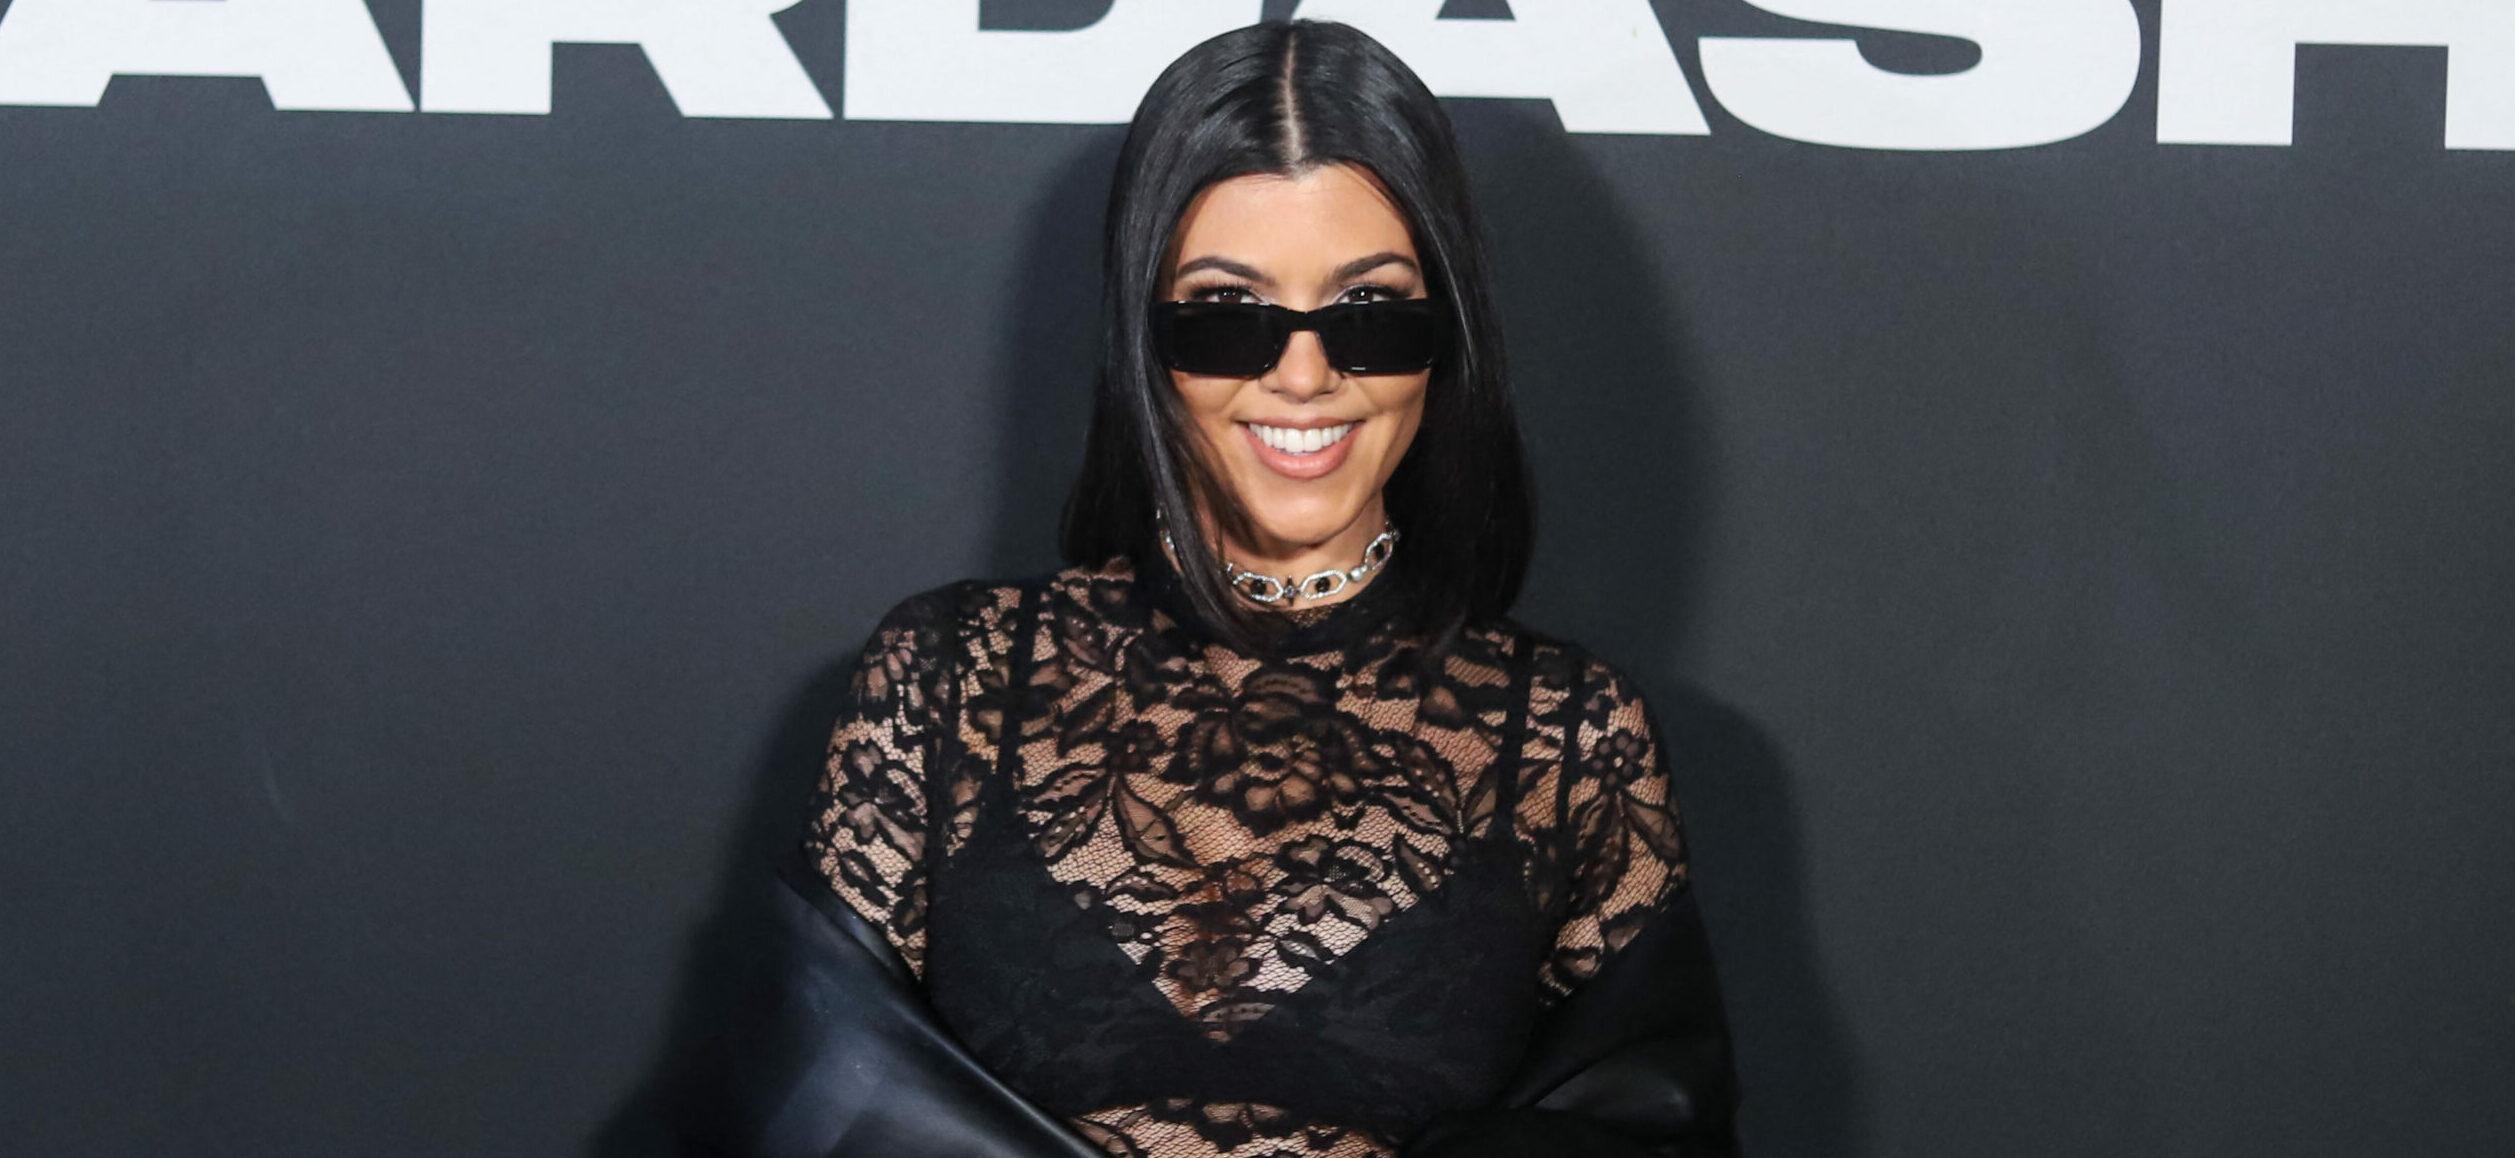 Kourtney Kardashian Gives ‘Britney Spears’ Vibes While Wearing Latex In Pre-pregnancy Pics